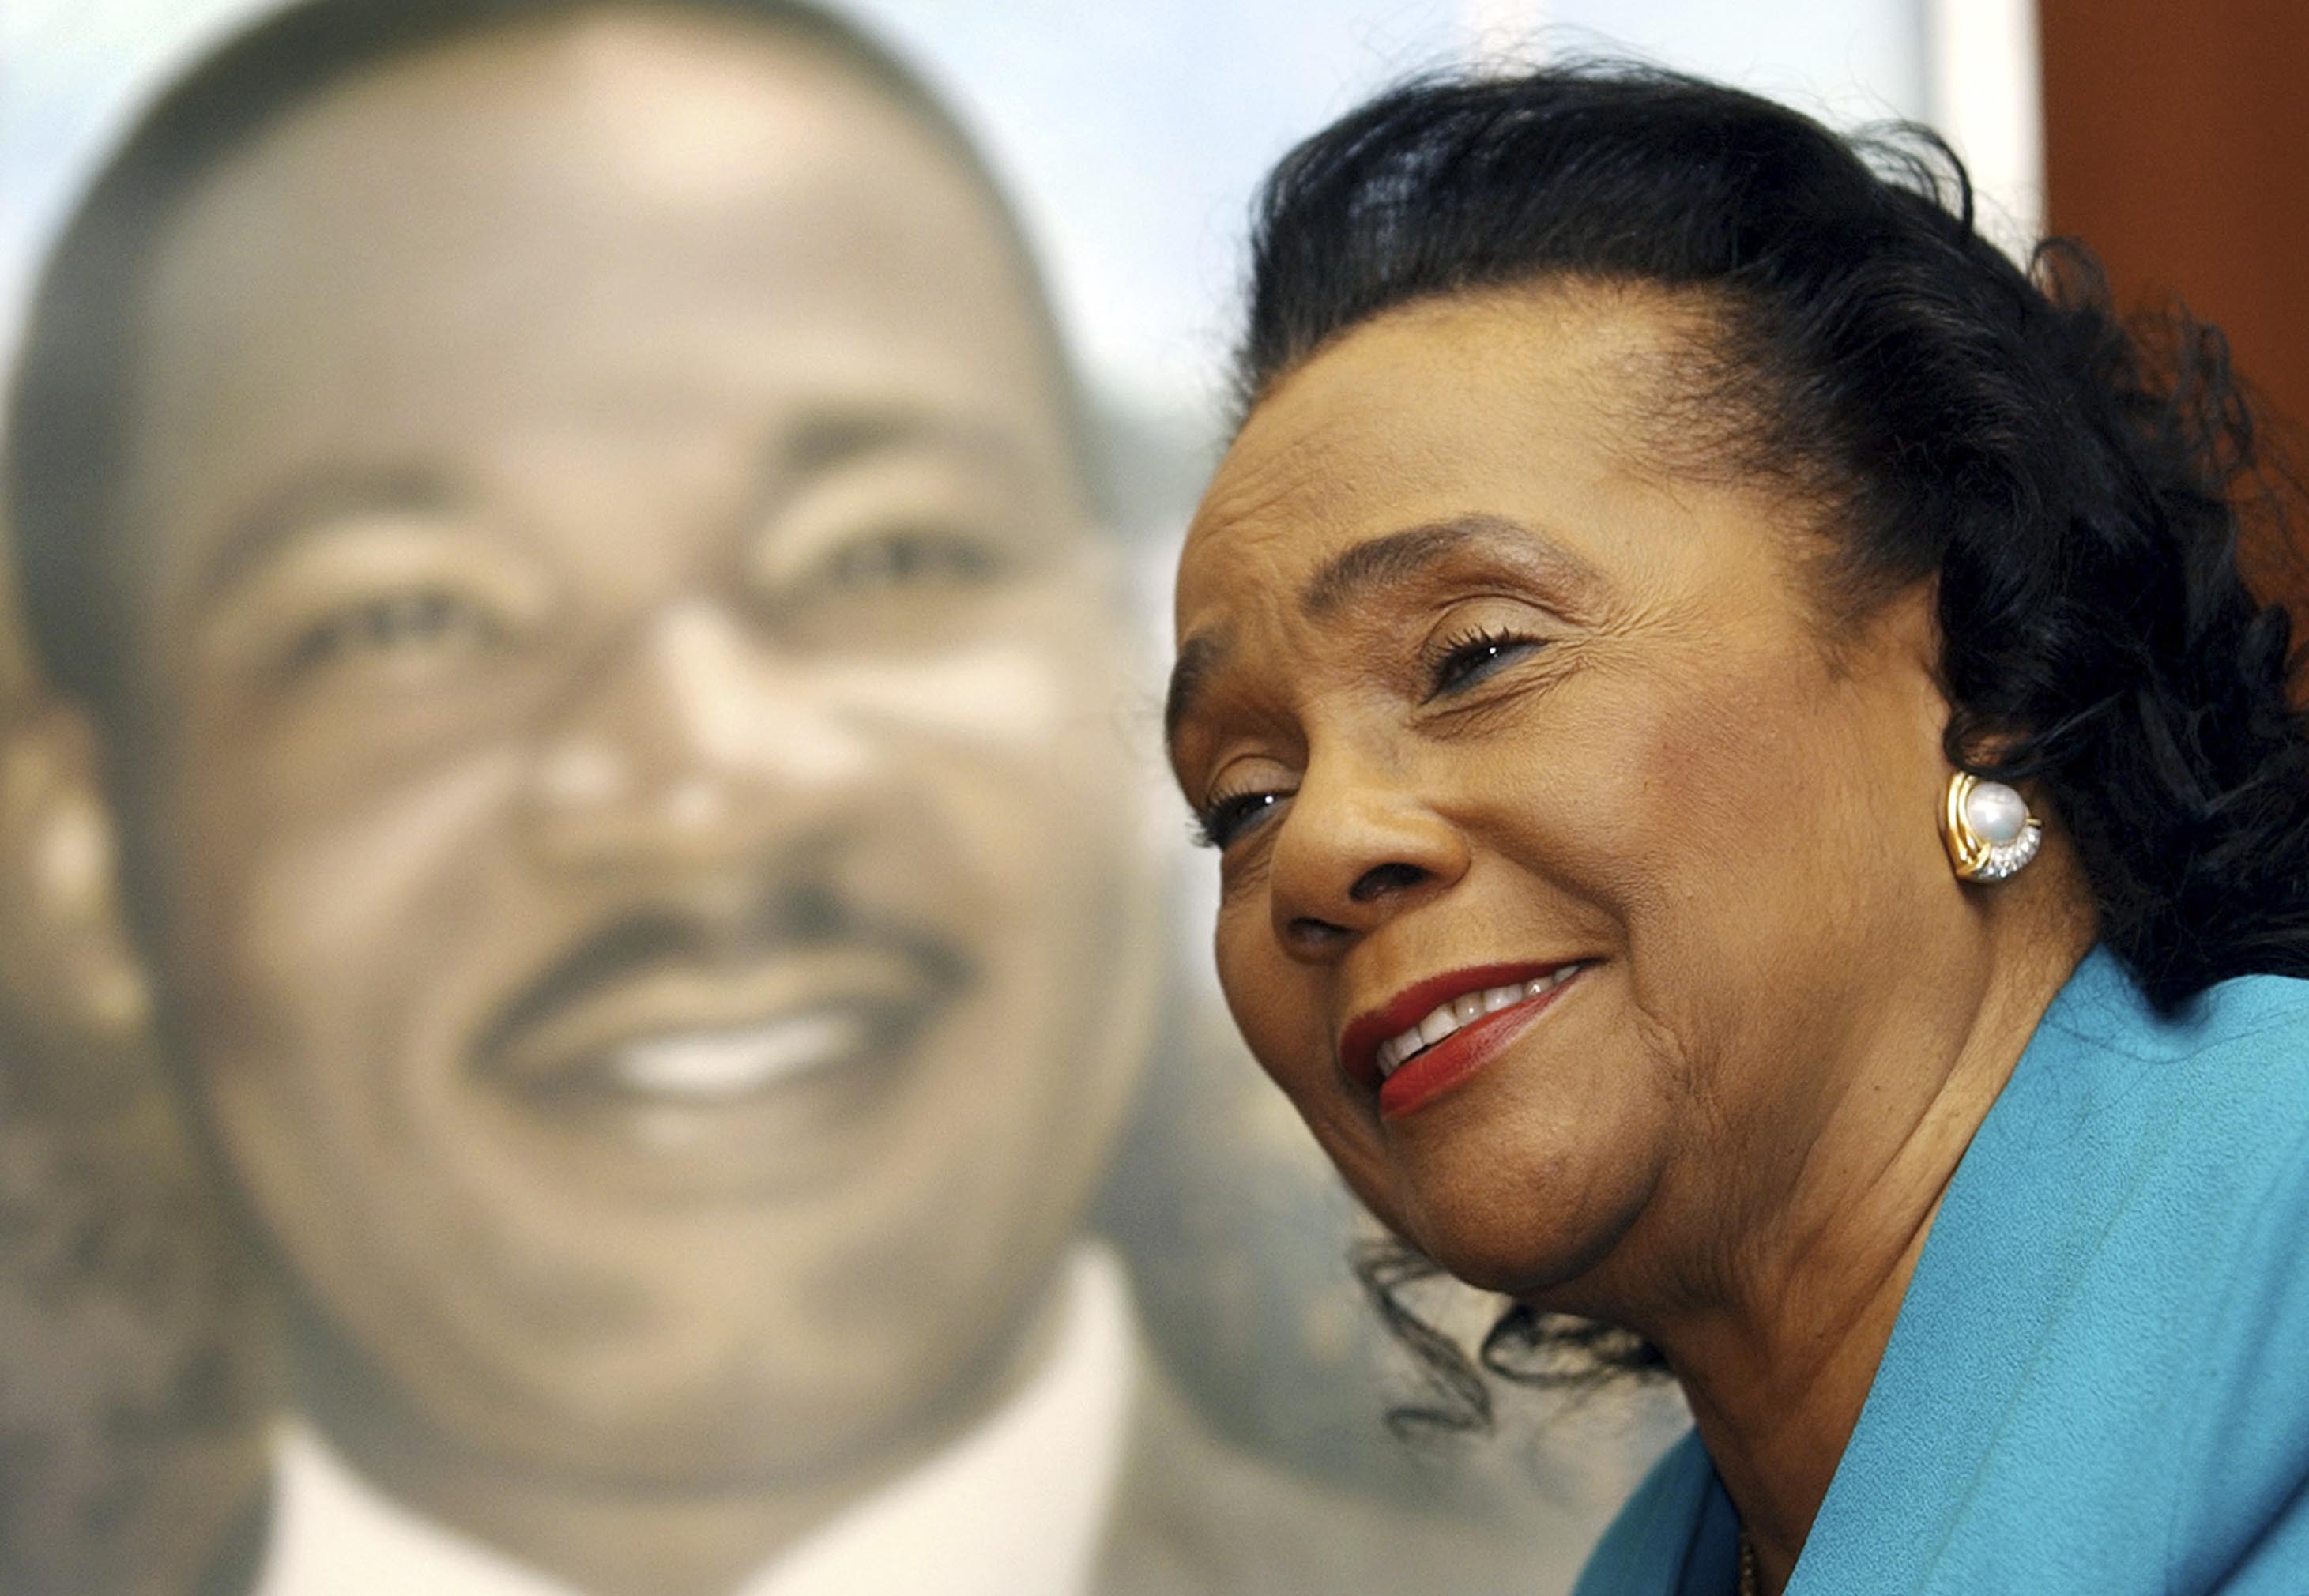 Coretta Scott King, widow of slain civil-rights leader Martin Luther King Jr., speaks during an interview at the King Center for Nonviolent Social Change in Atlanta, on January 13, 2004. Photo: AP/File